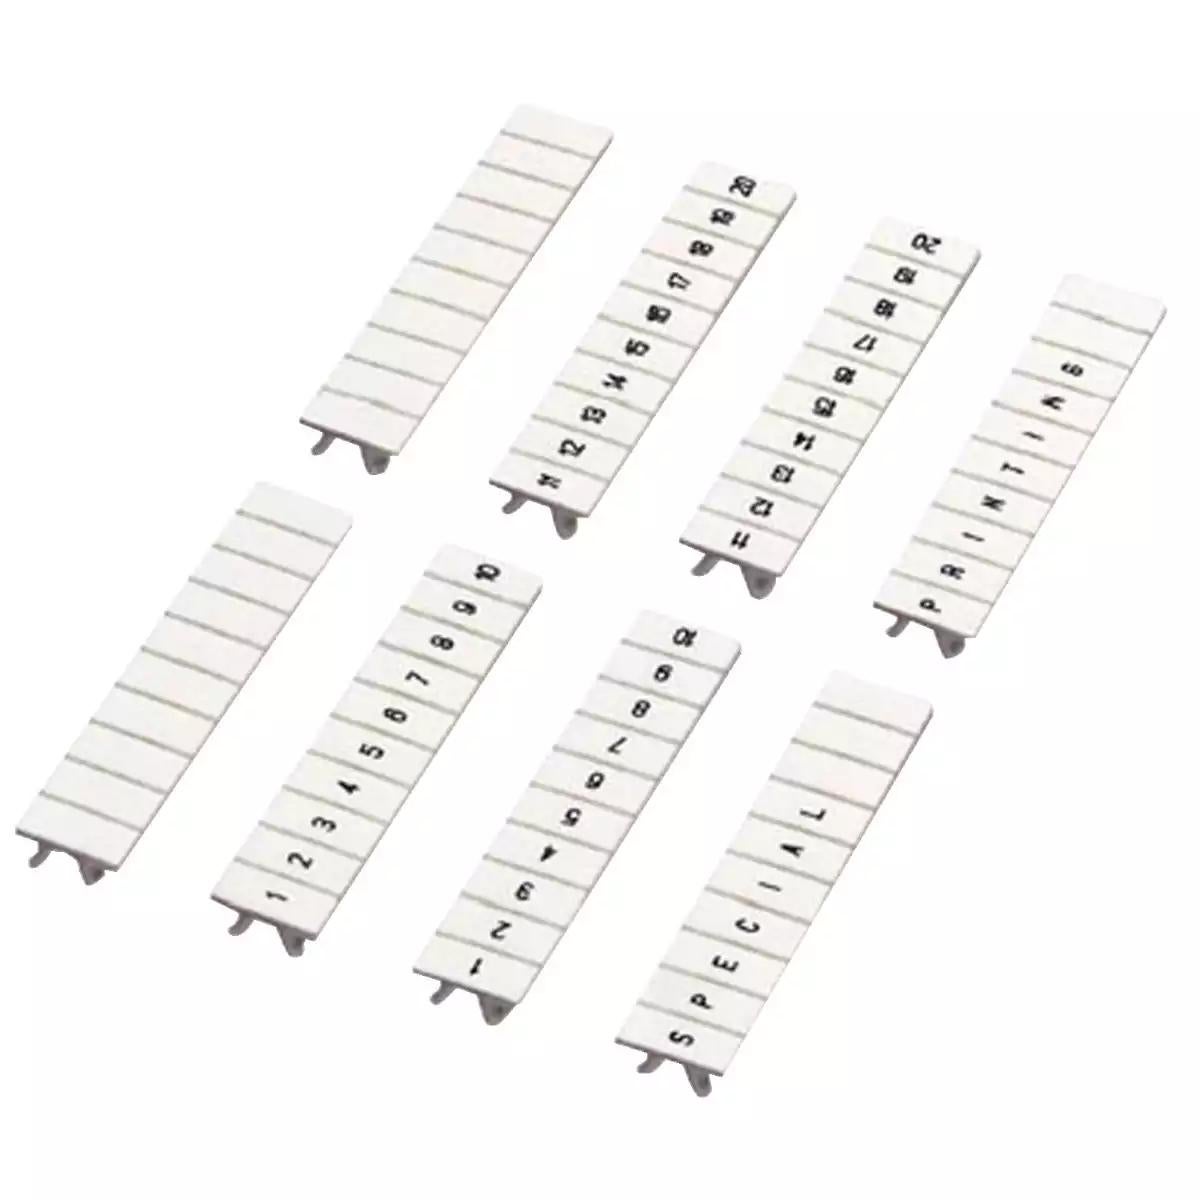 Schneider Electric Linergy TR Clip in marking strip, 5mm, 10 characters 91 to 100, printed horizontally, white